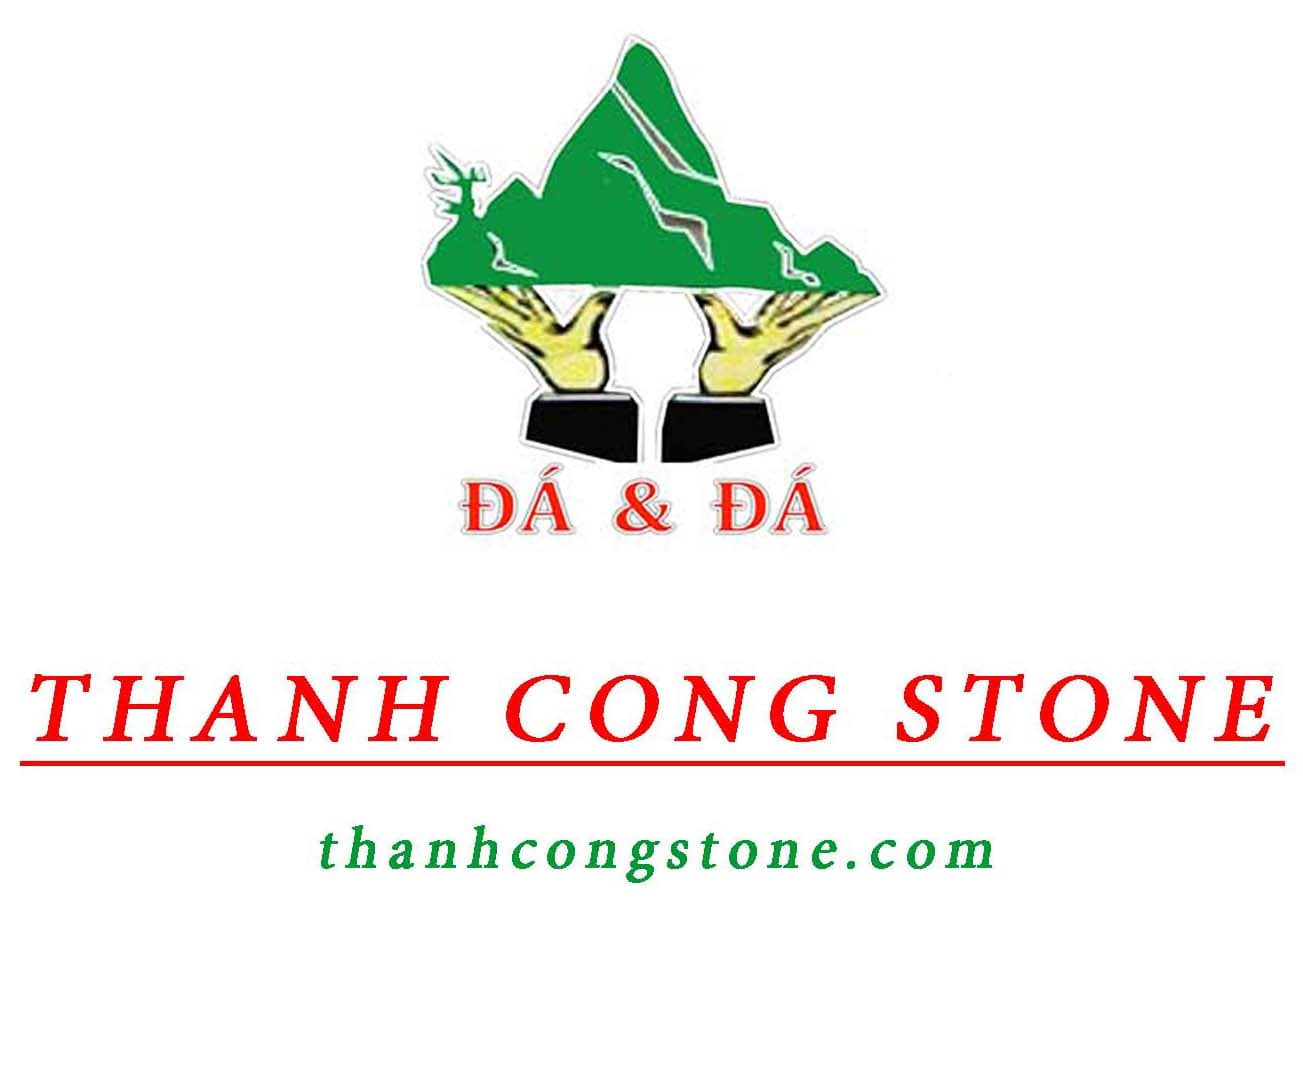 Thanh Cong Stone JSC